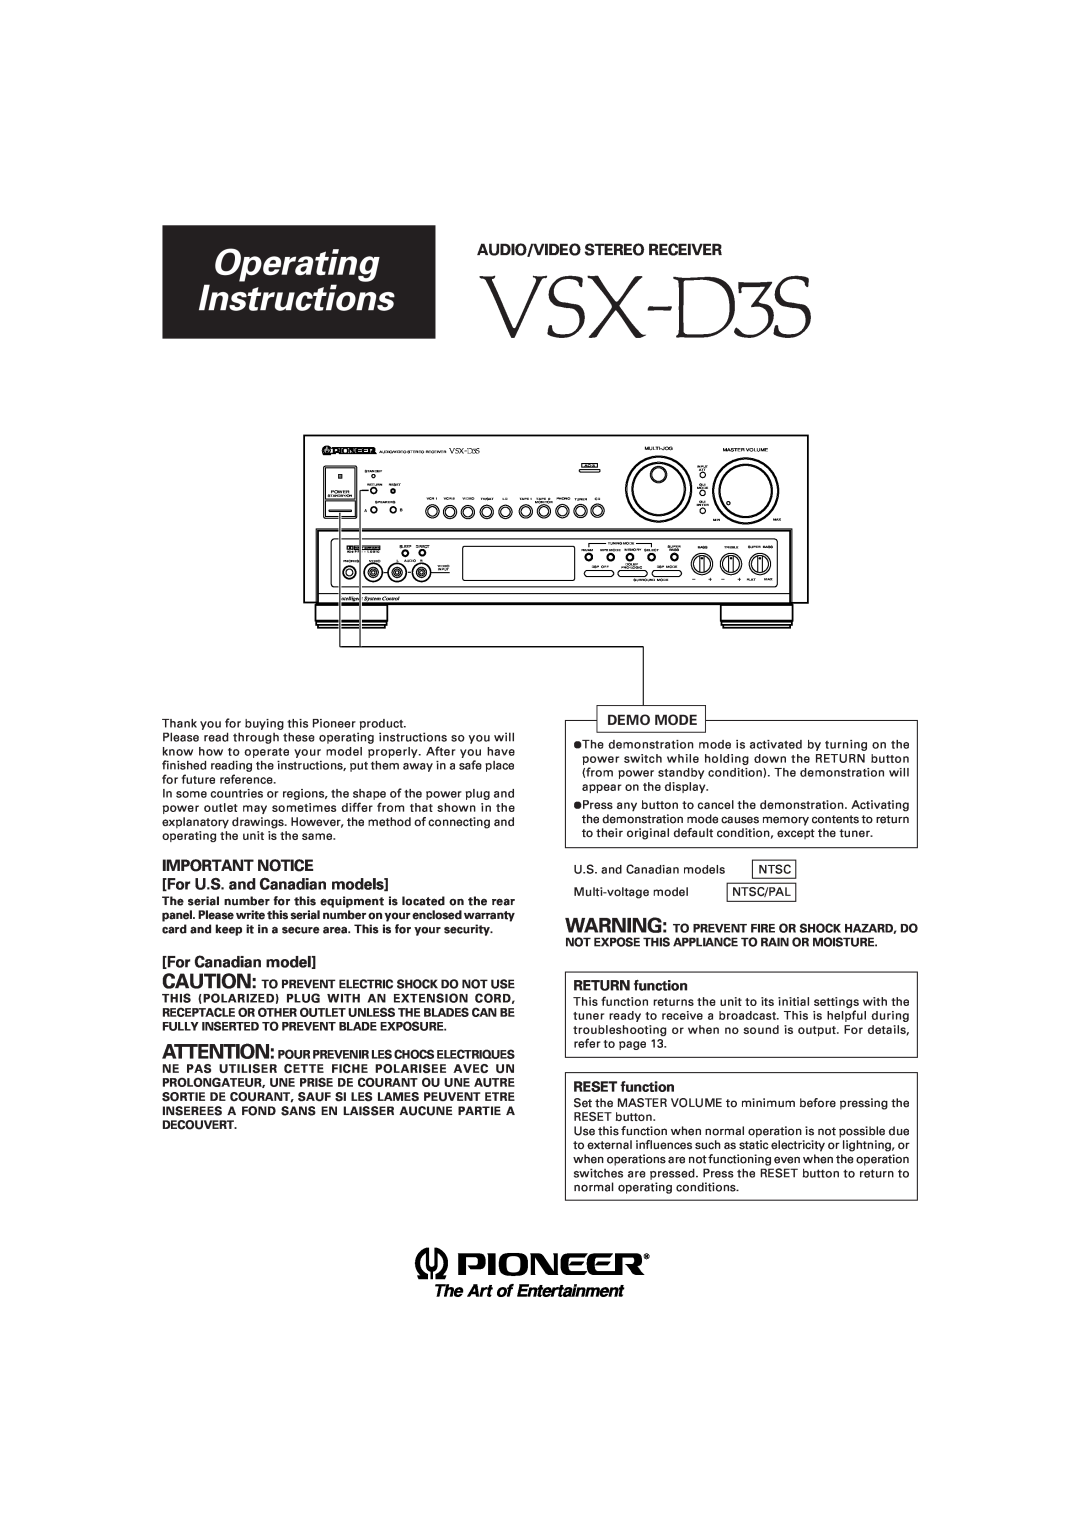 Pioneer VSX-D3S warranty Audio/Video Stereo Receiver, IMPORTANT NOTICE For U.S. and Canadian models, For Canadian model 